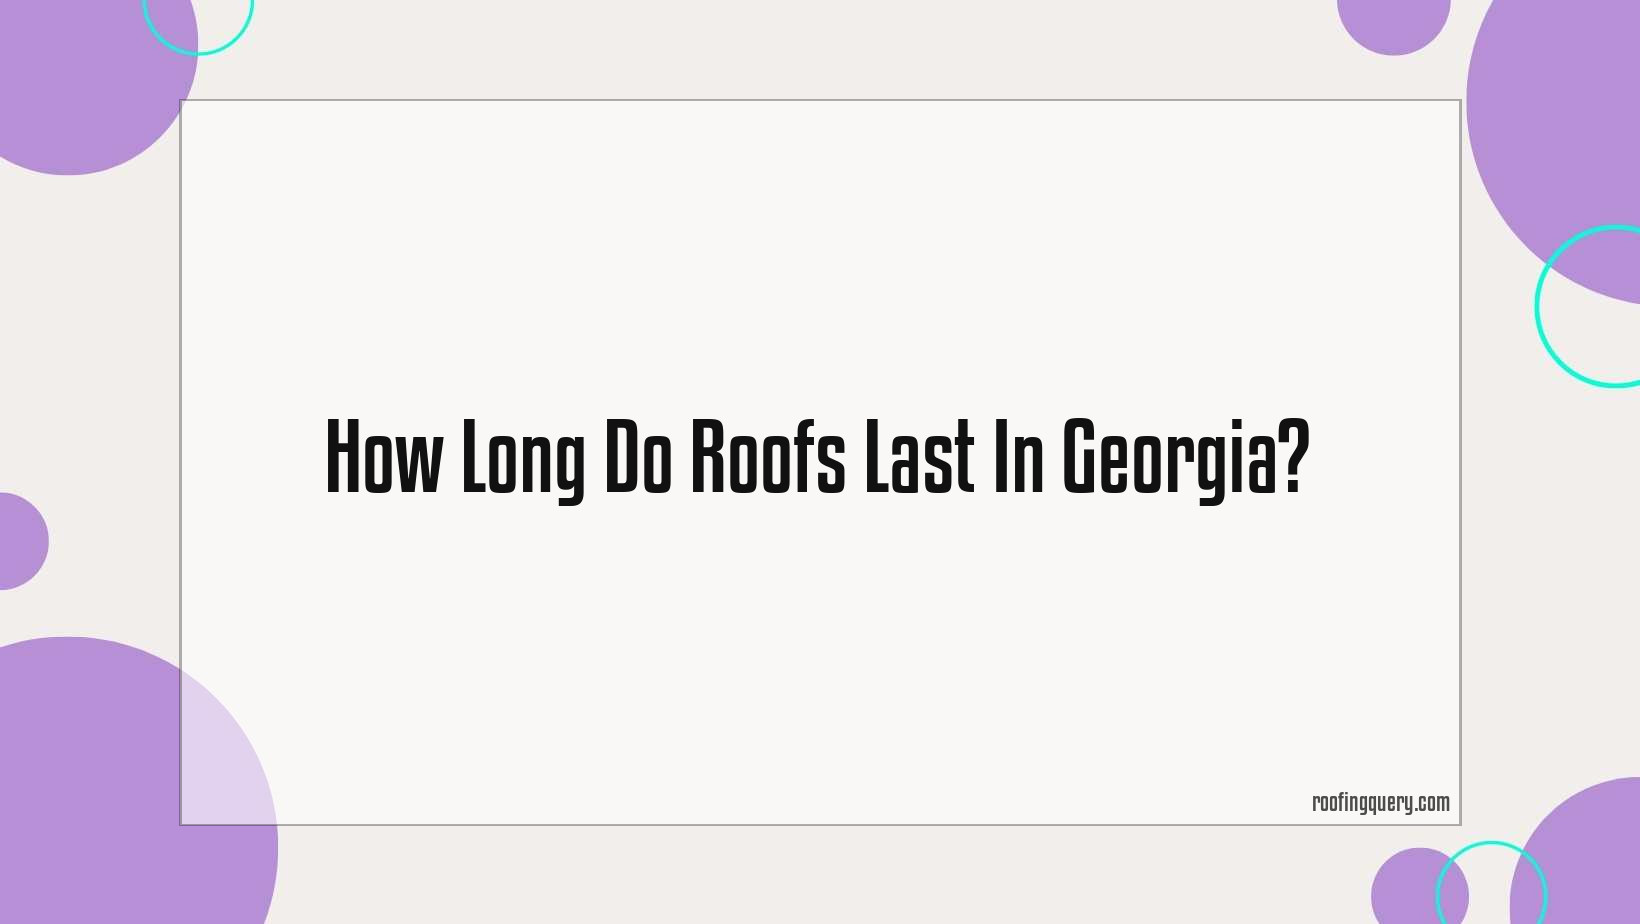 How Long Do Roofs Last In Georgia?